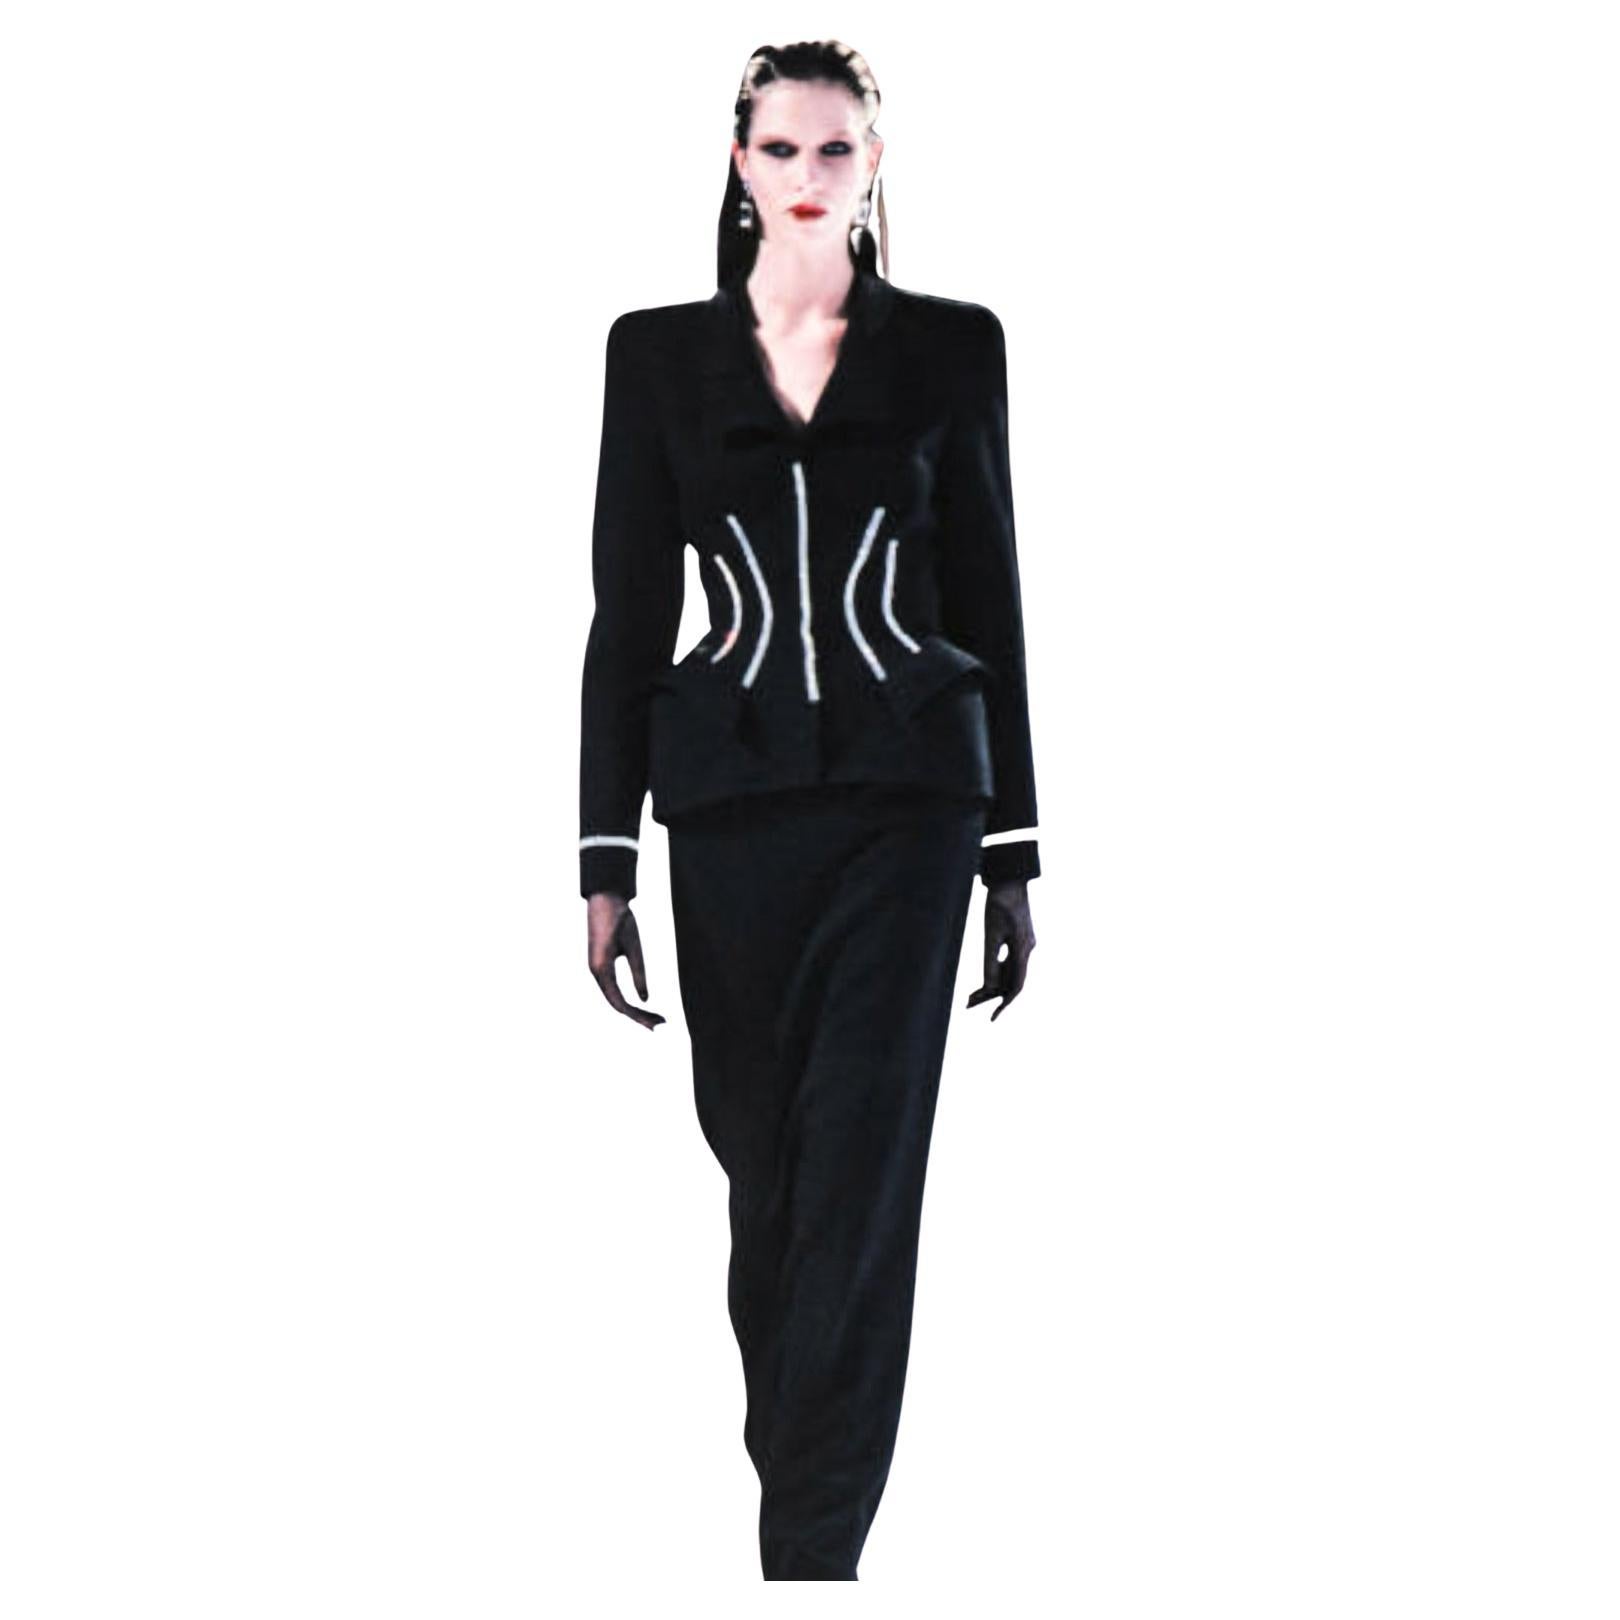 ICONIC Thierry Mugler FW 1998 Crystal Jacket Ensemble Famous Helmut Newton  For Sale